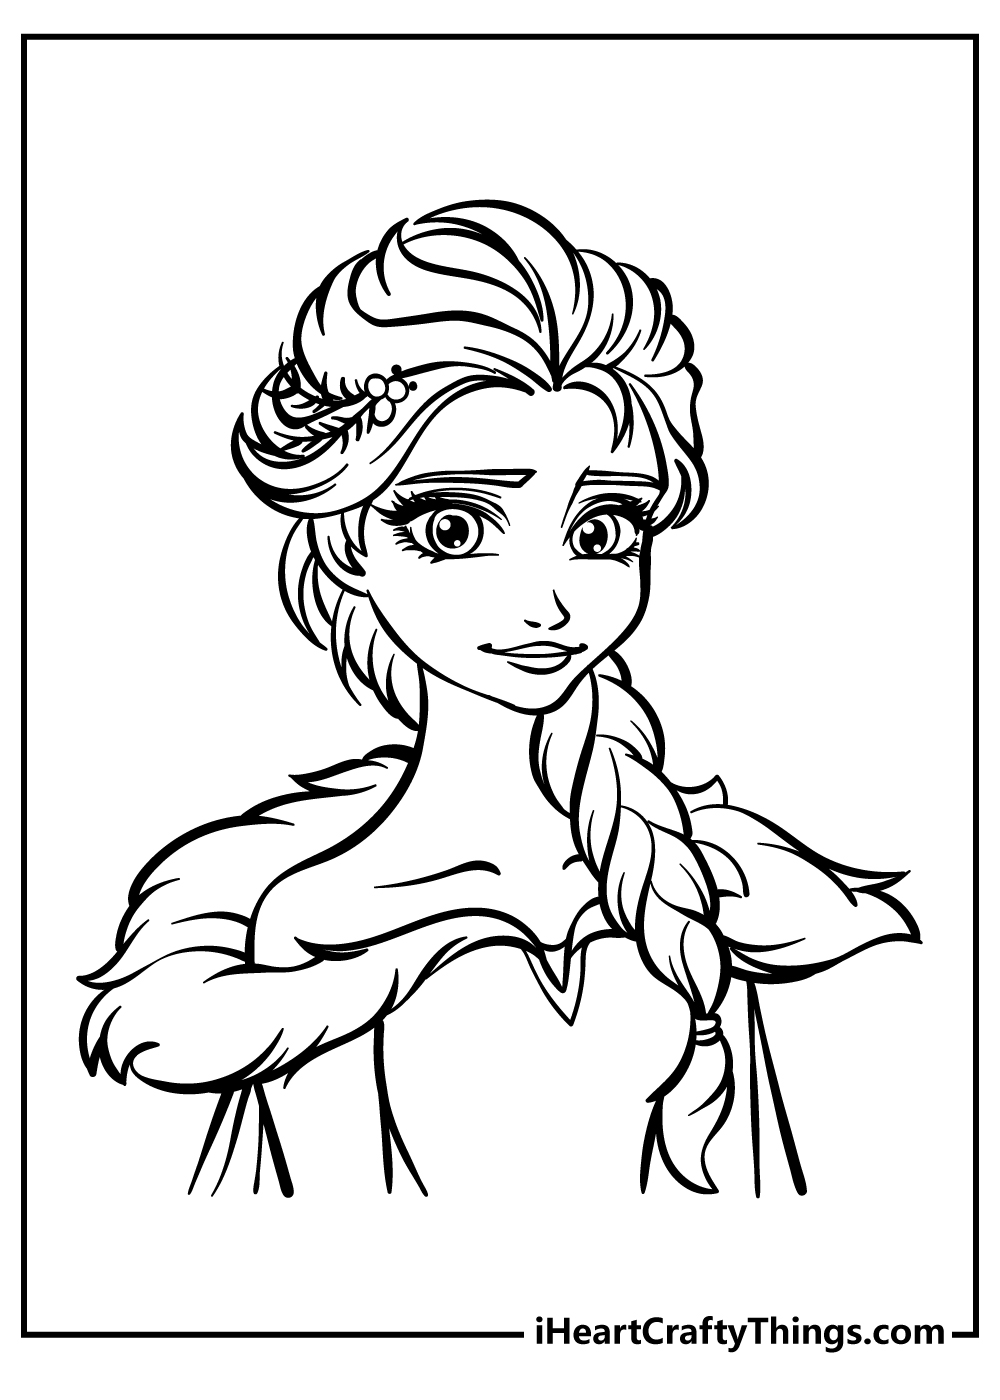 Free Frozen Coloring Pages Great Coloring